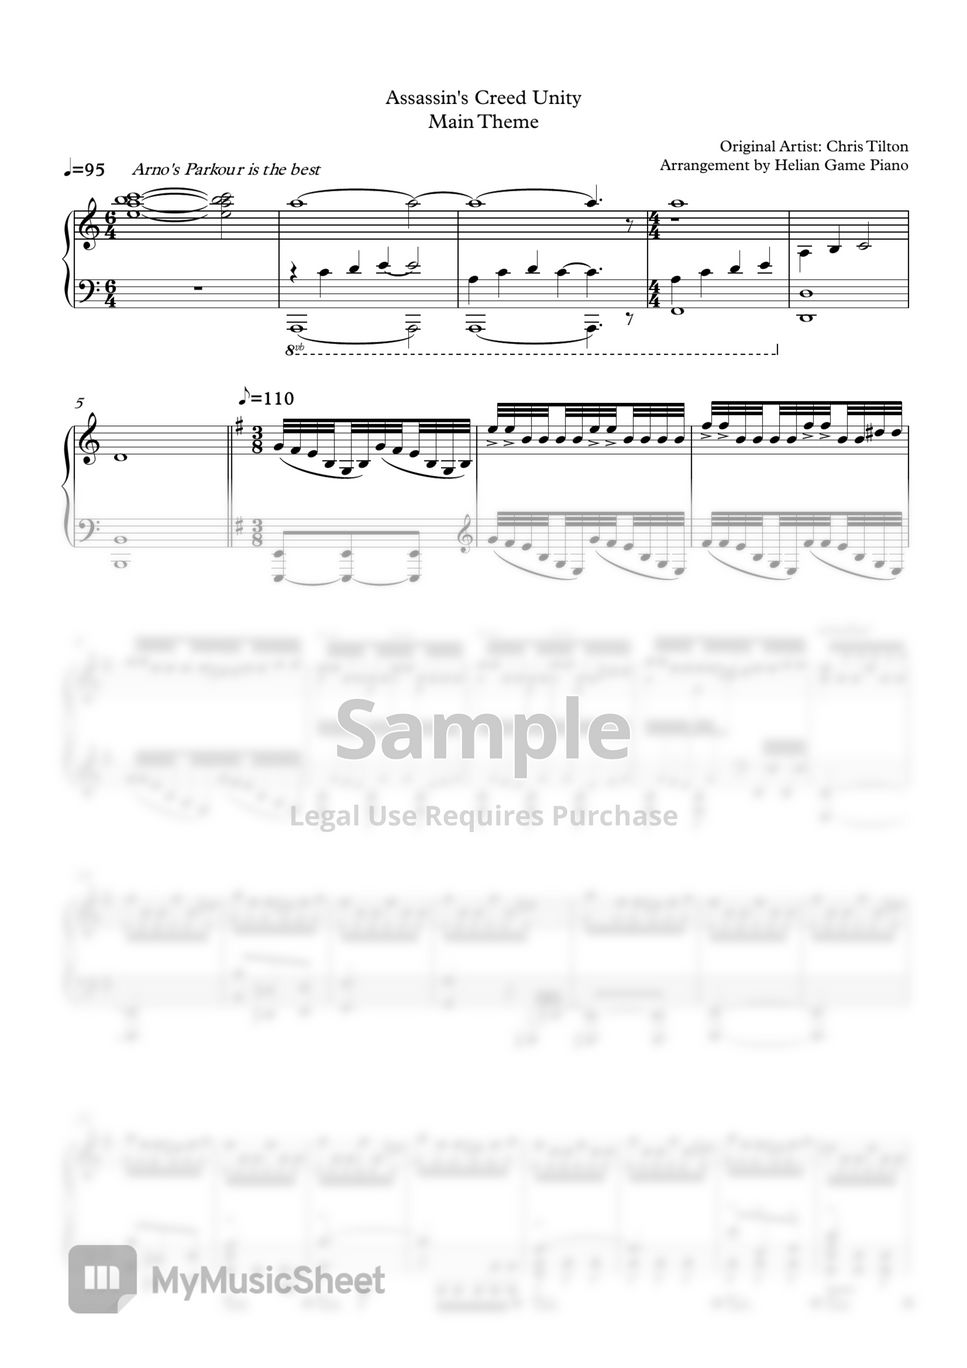 Assassin's Creed Unity - Main Theme Sheets by Helian Game Piano